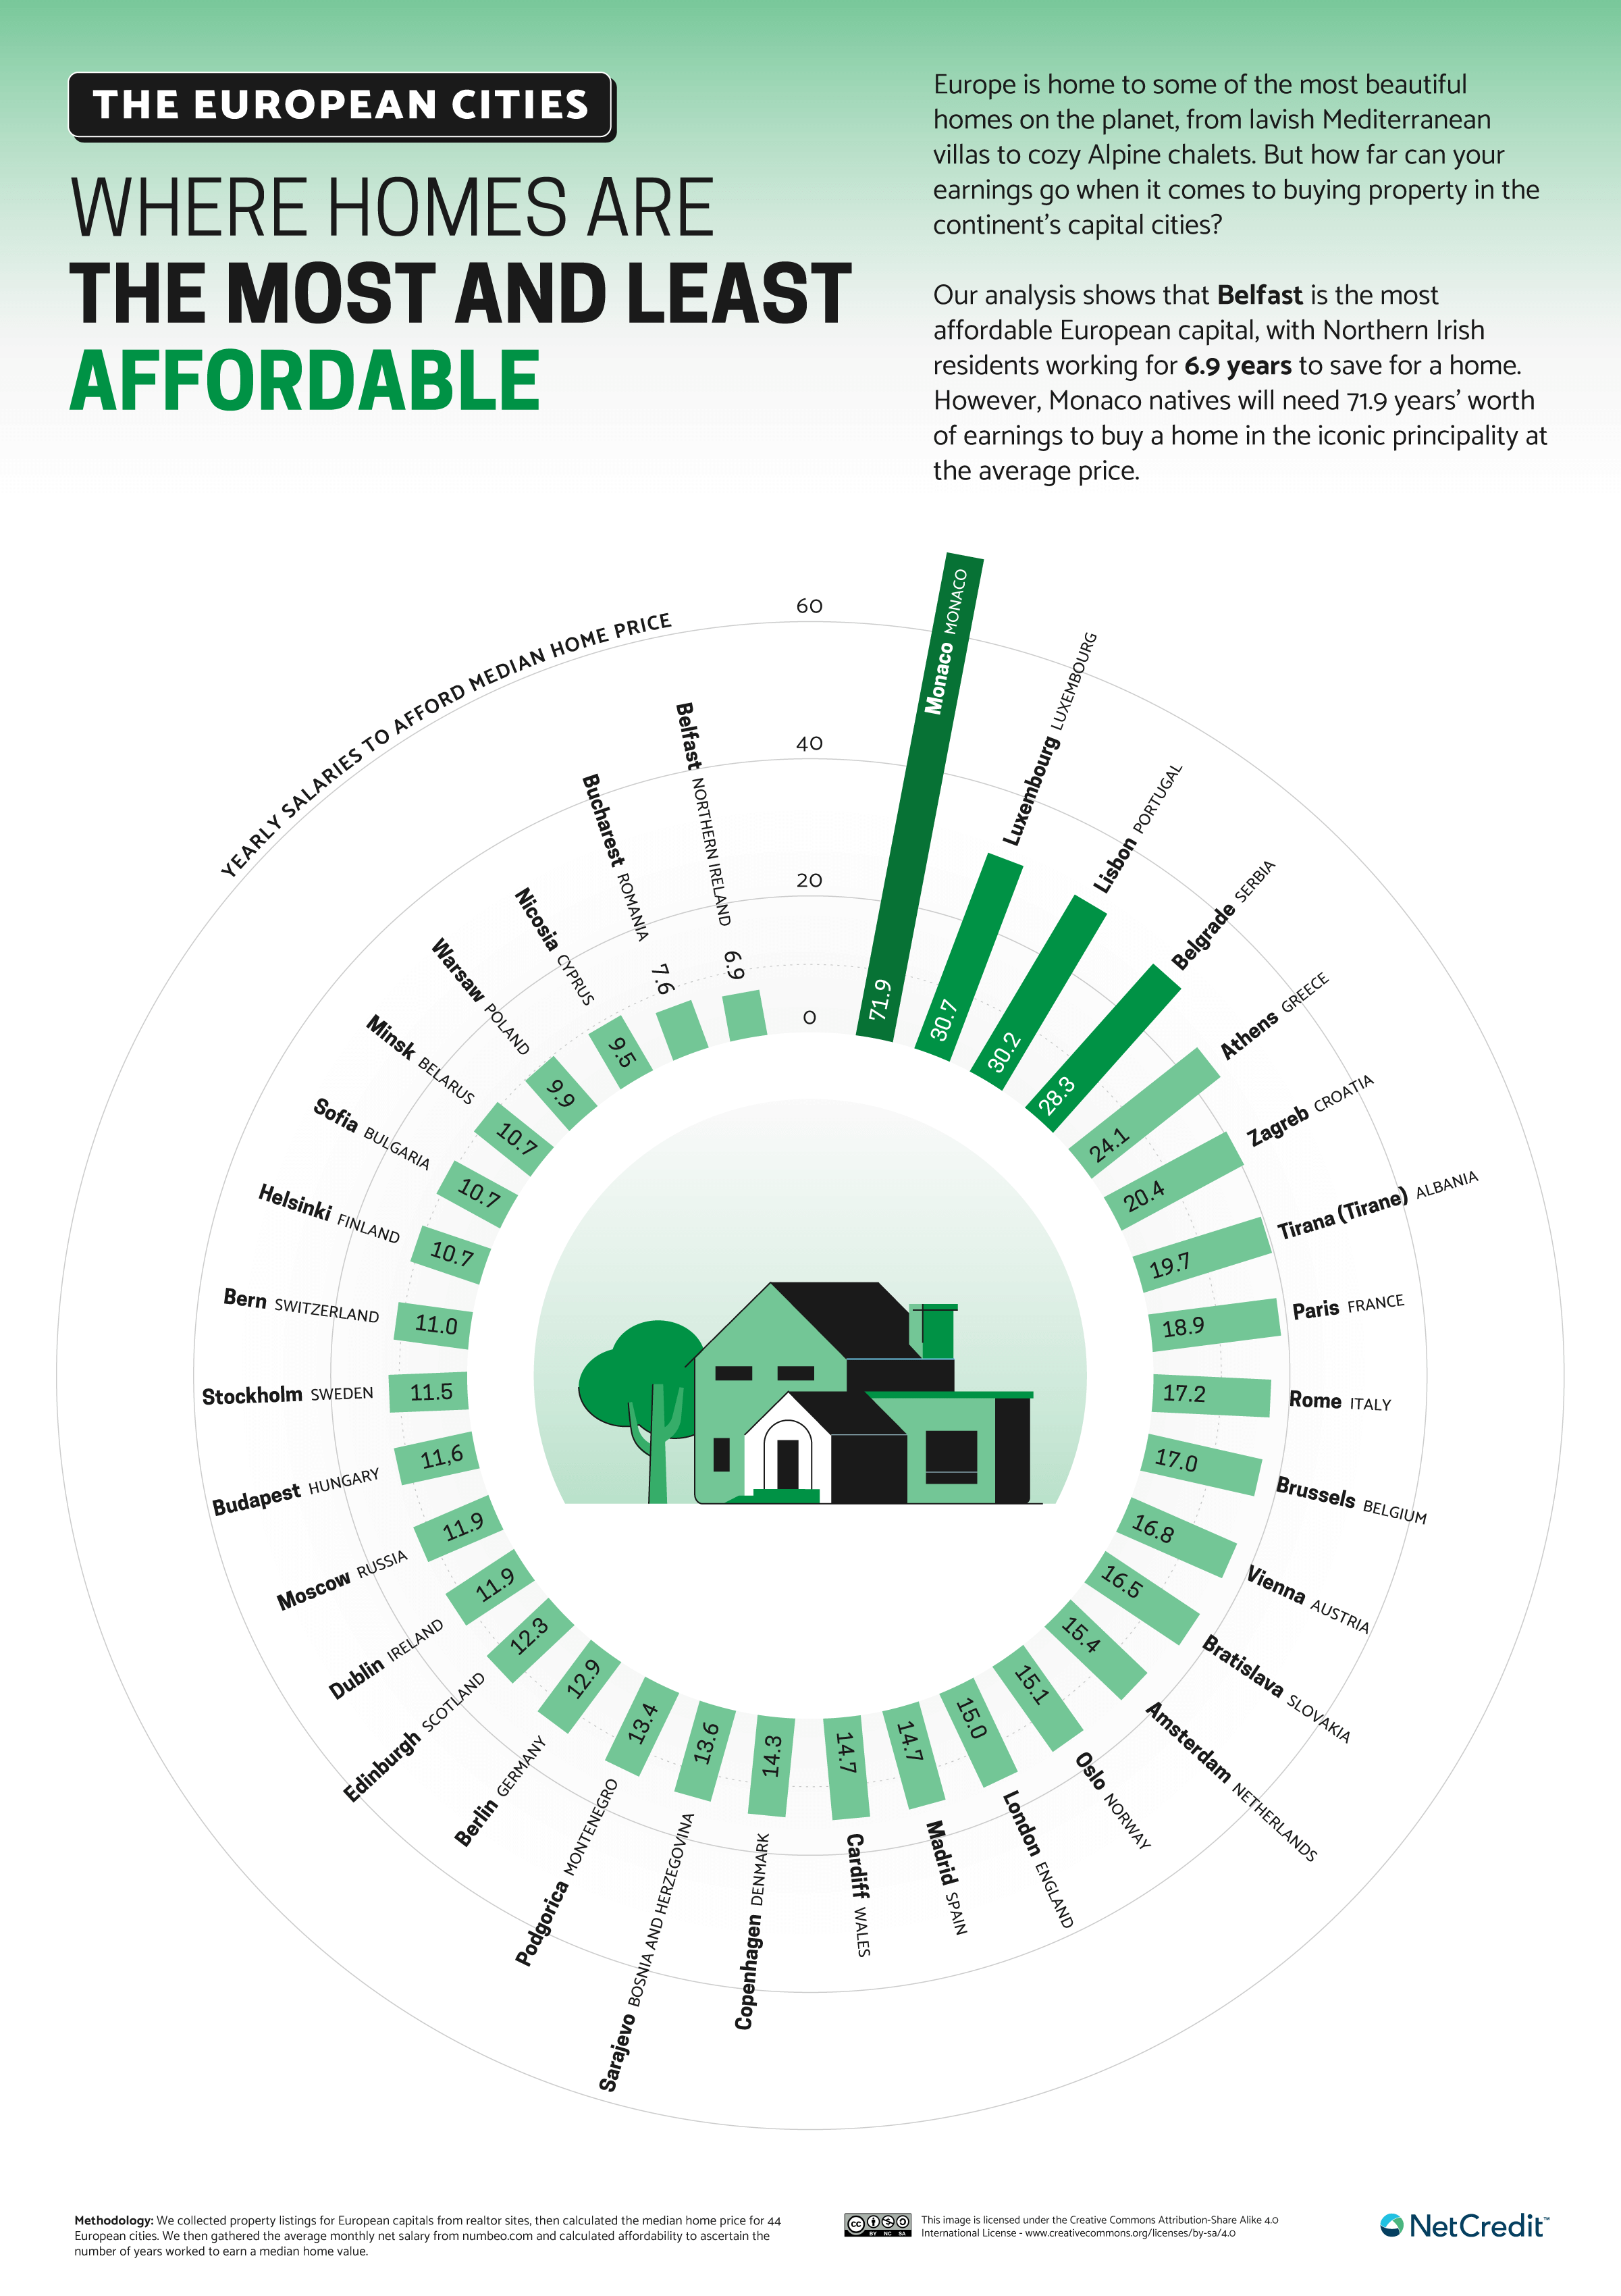 European cities where homes are most and least affordable infographic